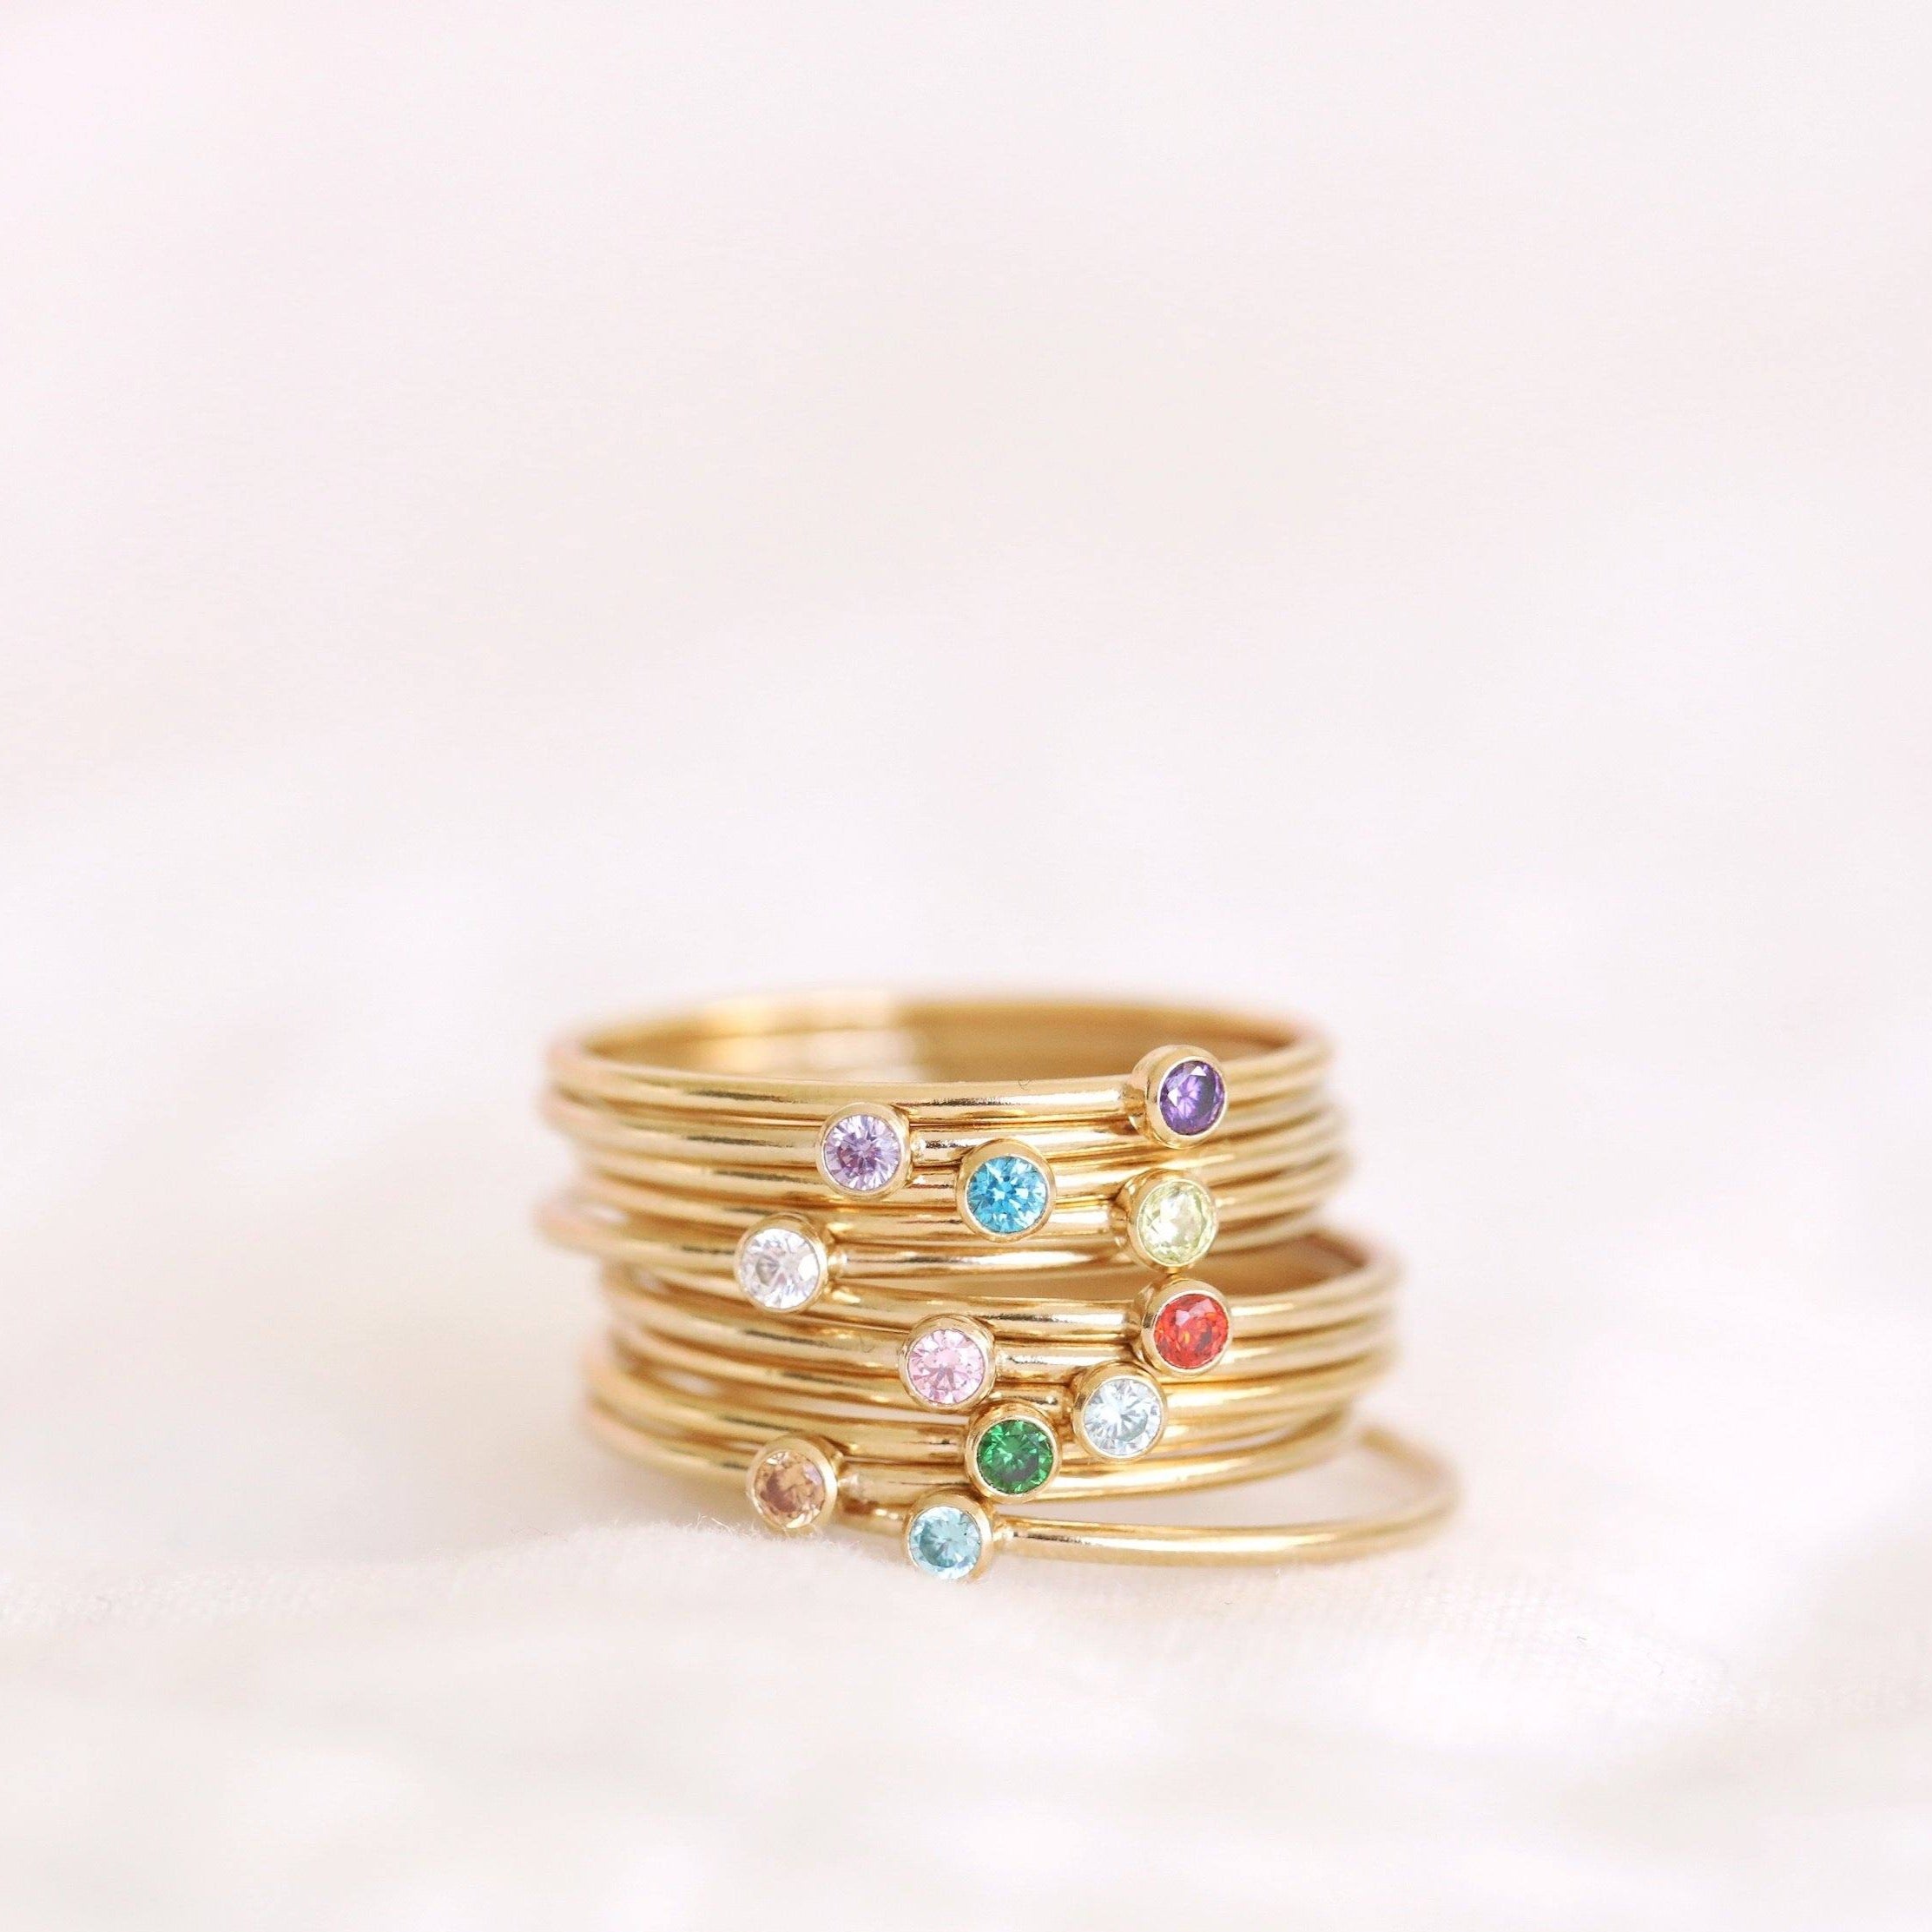 Handmade birthstone rings made with sterling silver and gold filled, handmade birthstone rings sustainably made in Canada.